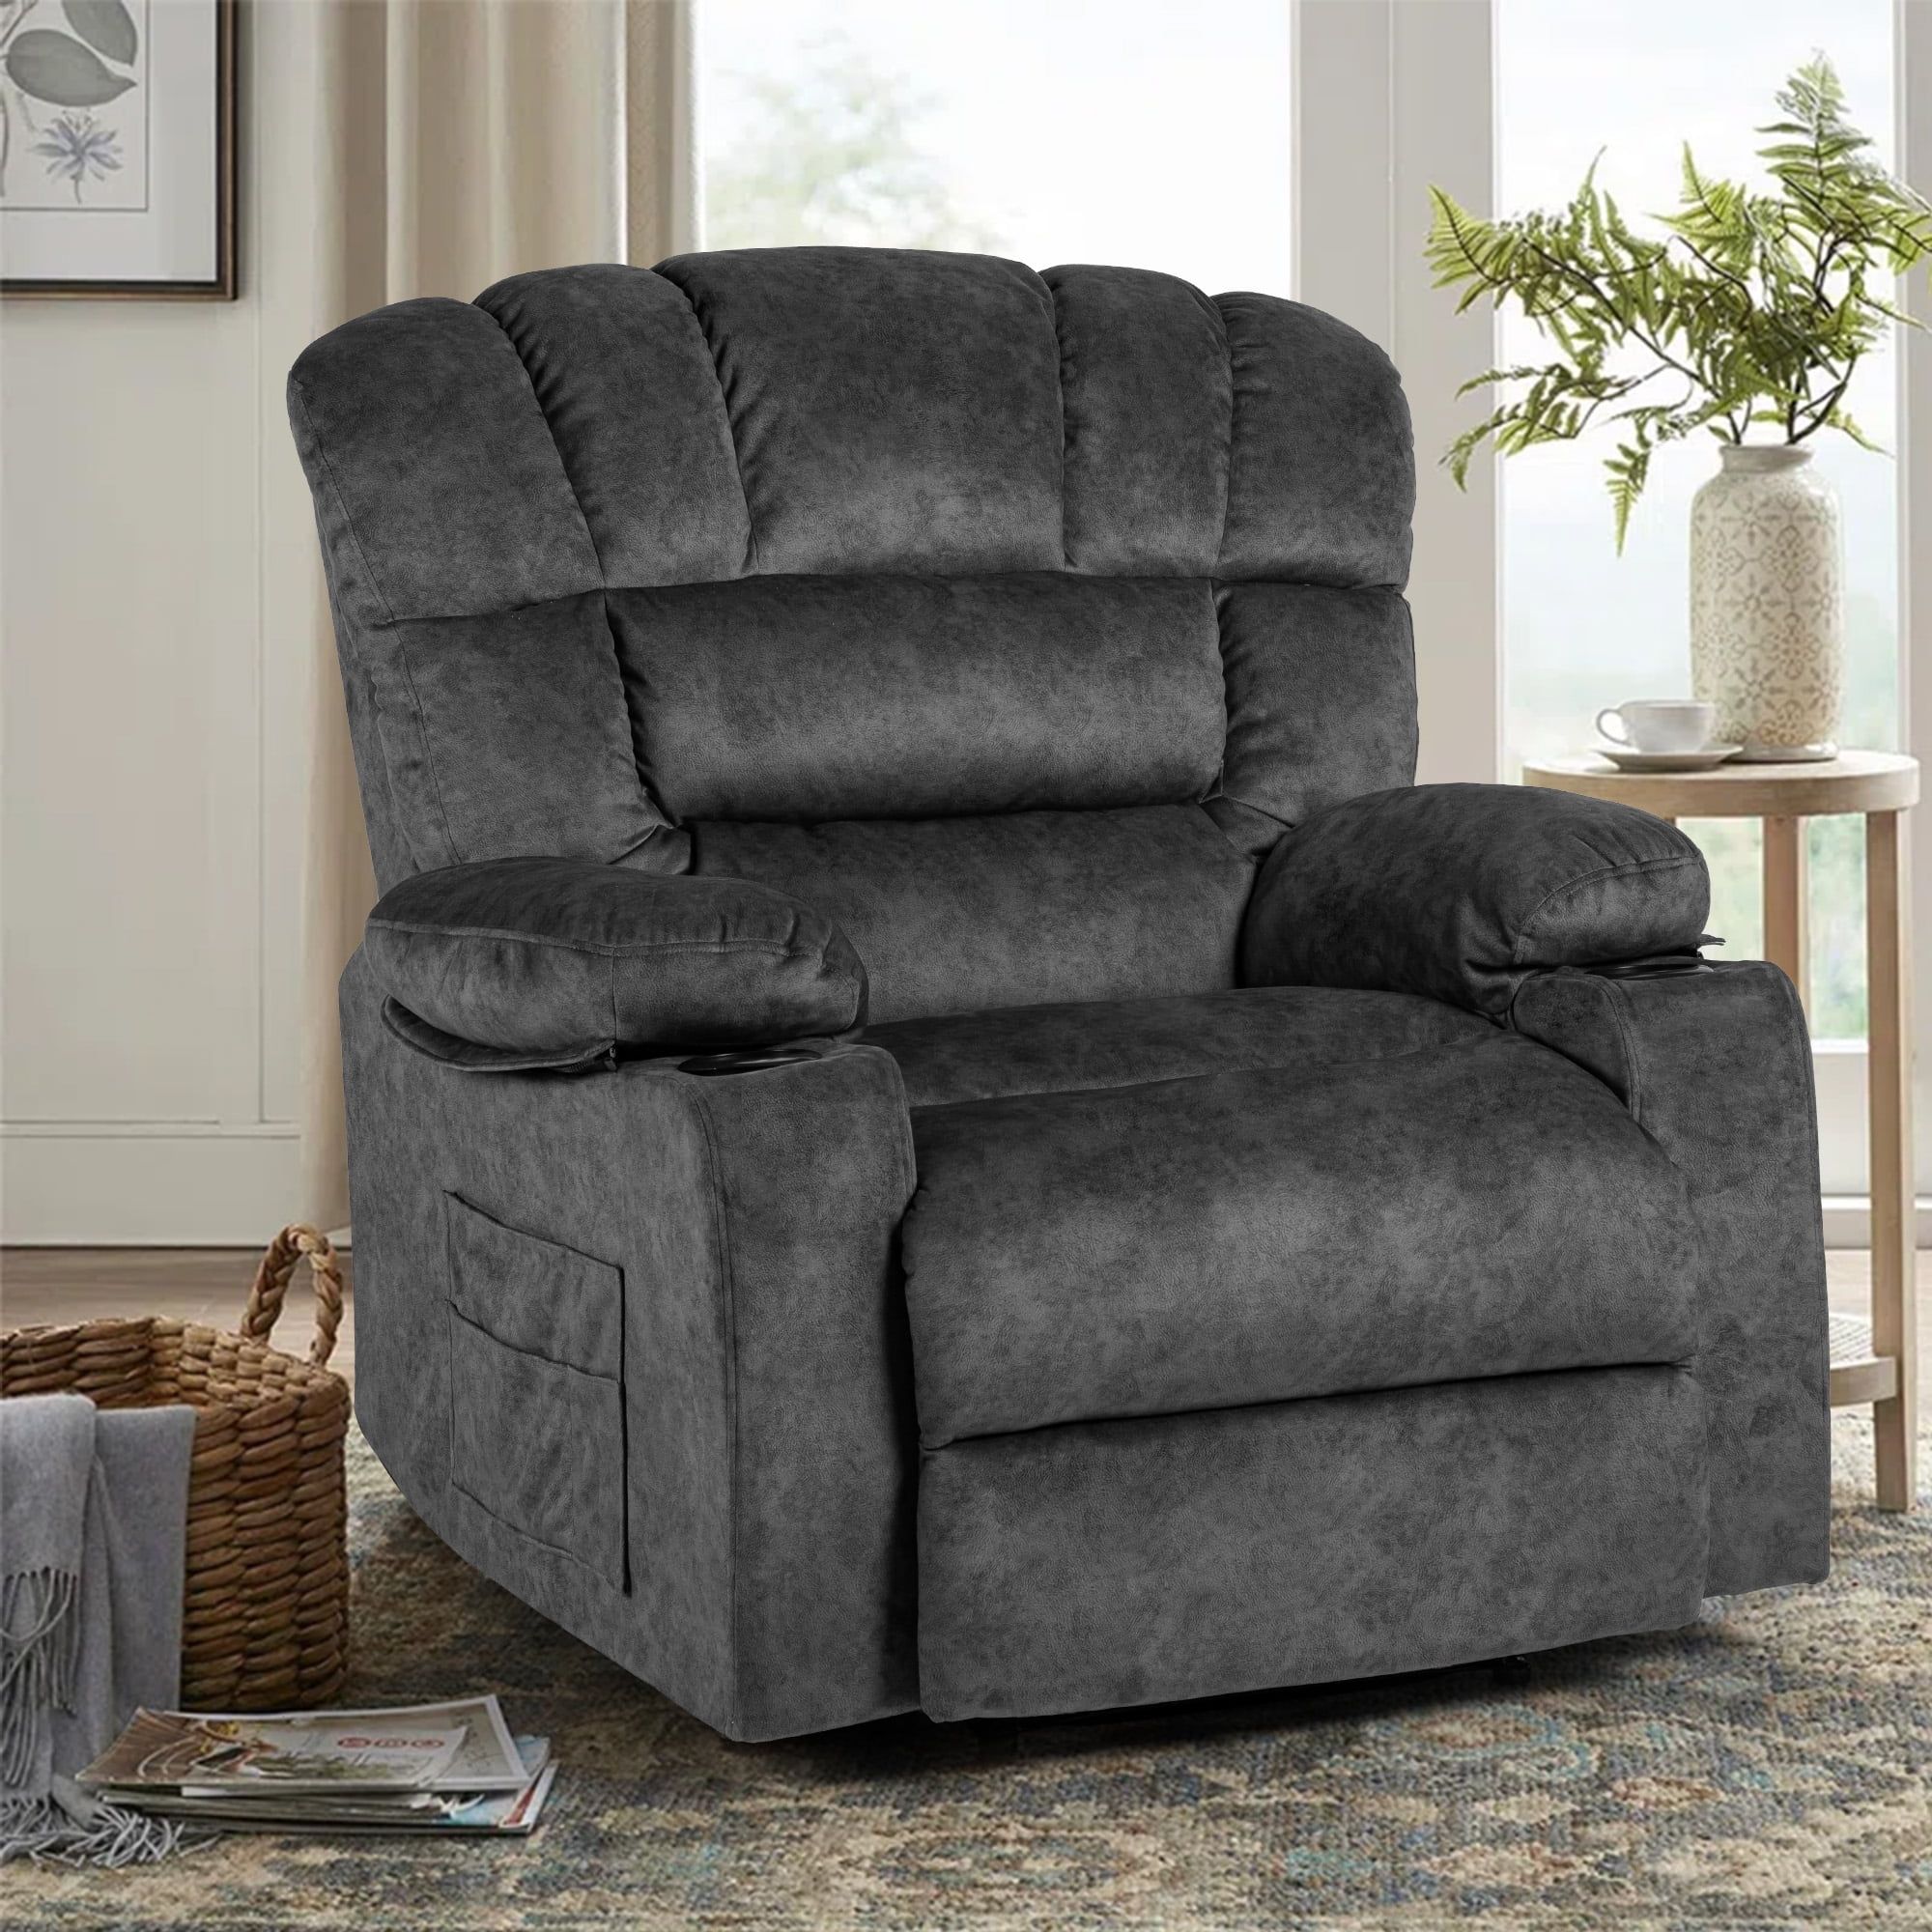 Colerline 40.9" Wide Super Soft And Oversize Modern Design Velvet  Upholstered Manual Recliner Chair With Heating And Massage, Brown –  Walmart With Regard To Modern Velvet Upholstered Recliner Chairs (Photo 7 of 15)